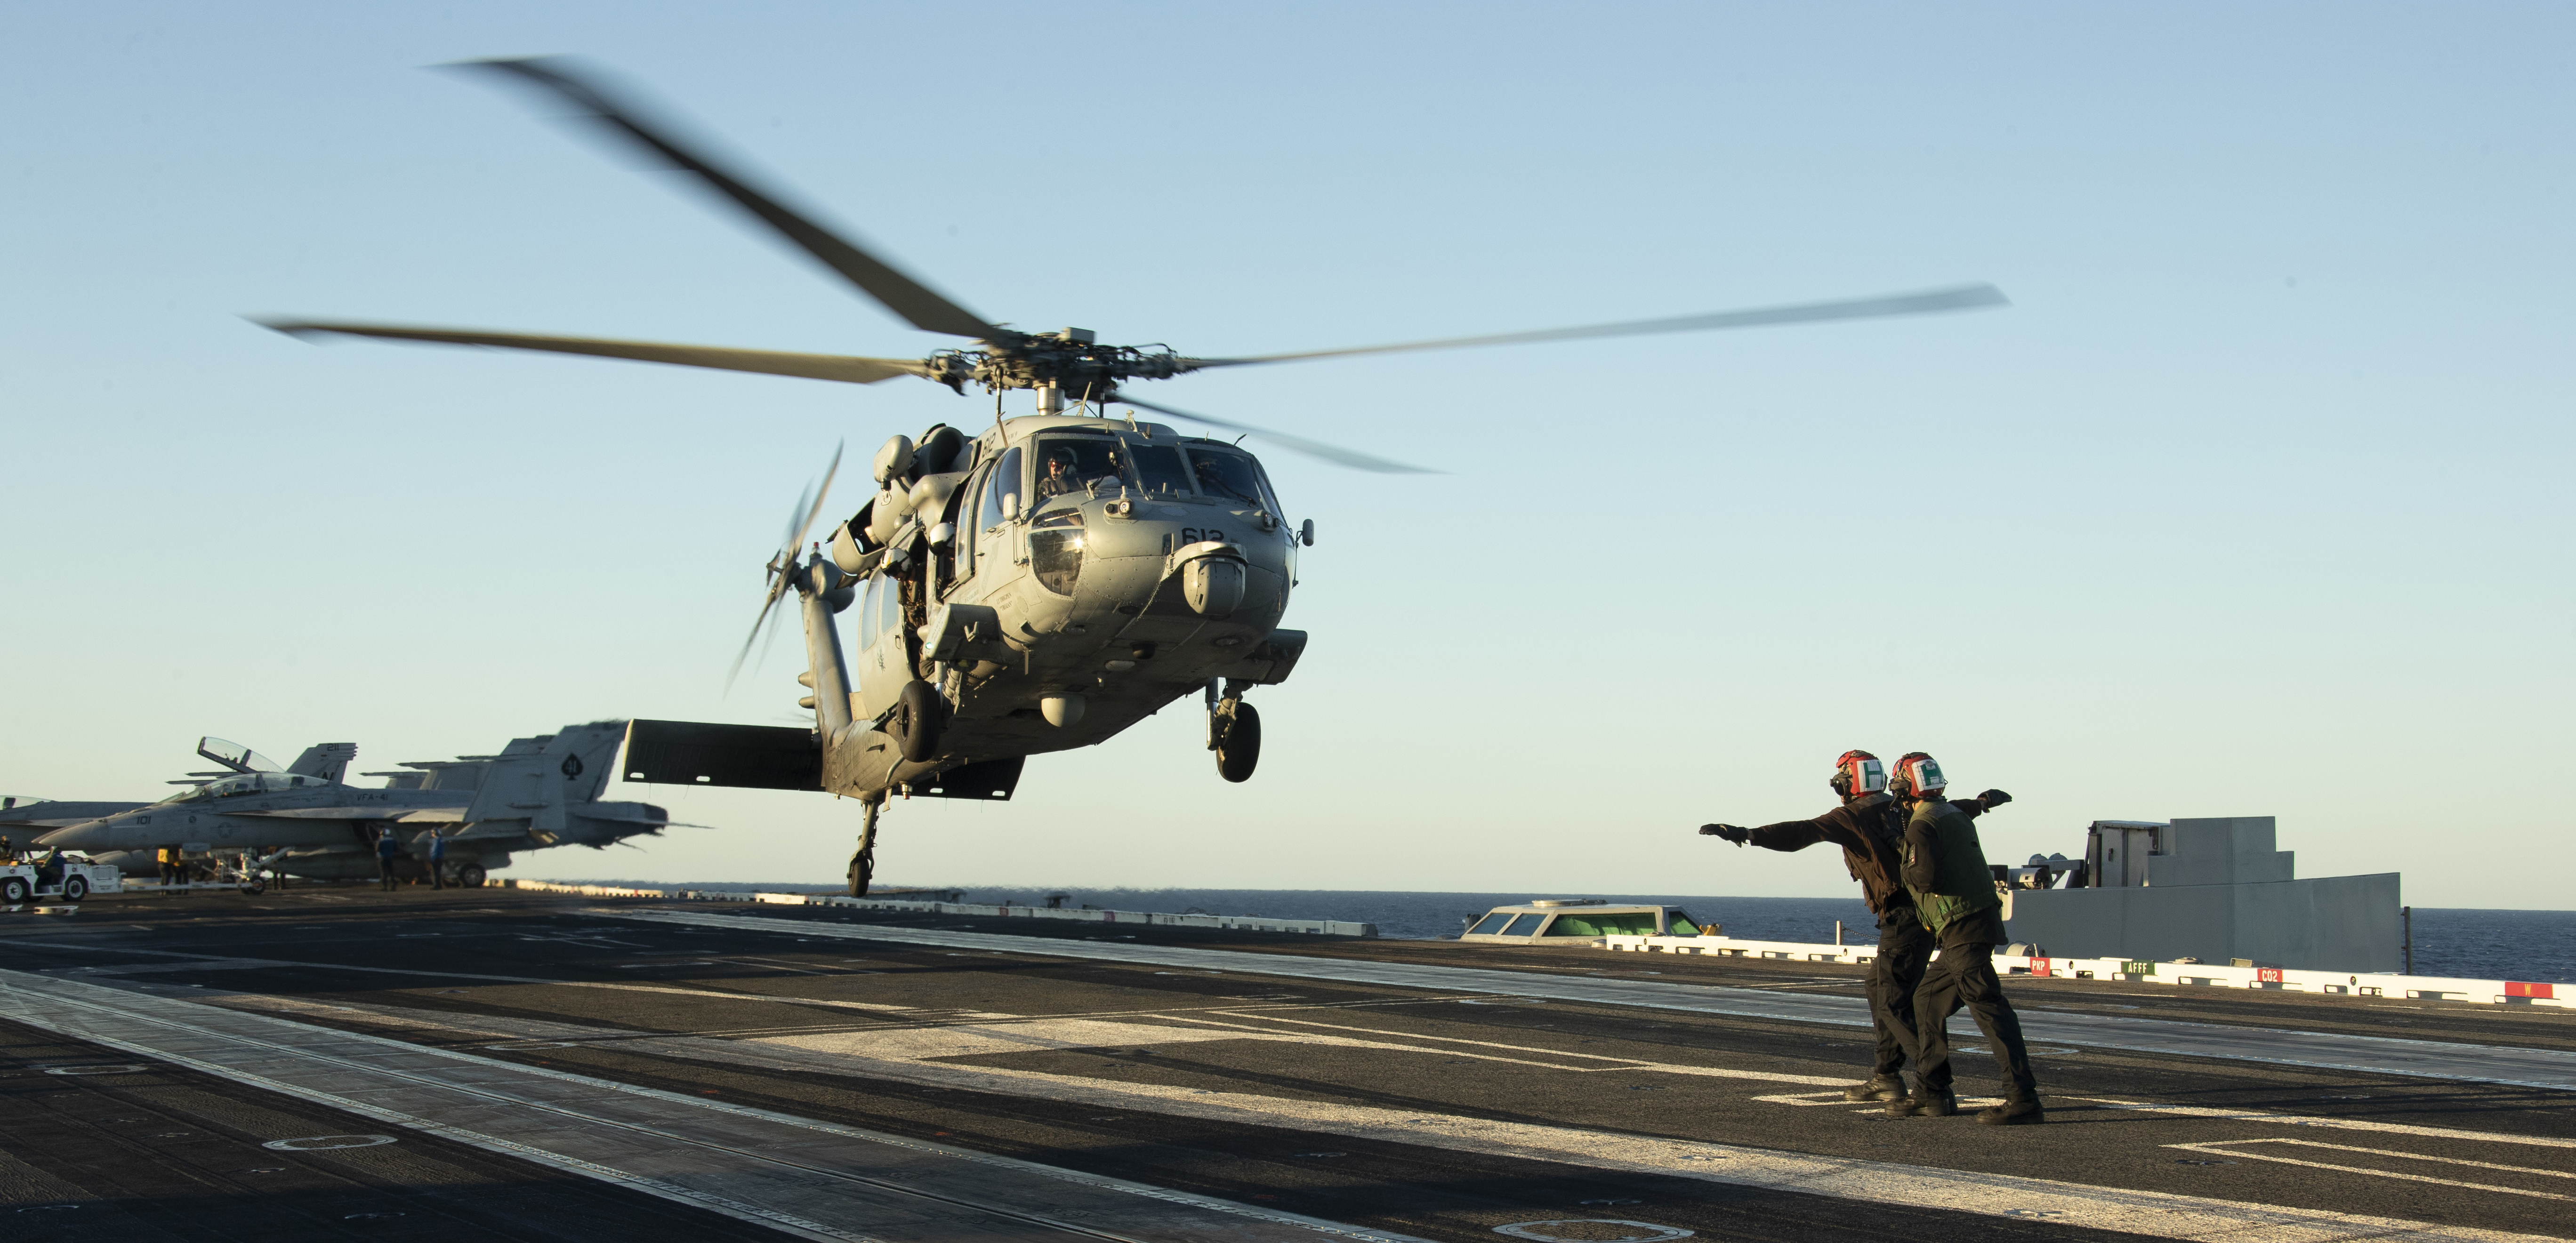 Two landing signal officers guide a helicopter landing on an aircraft carrier